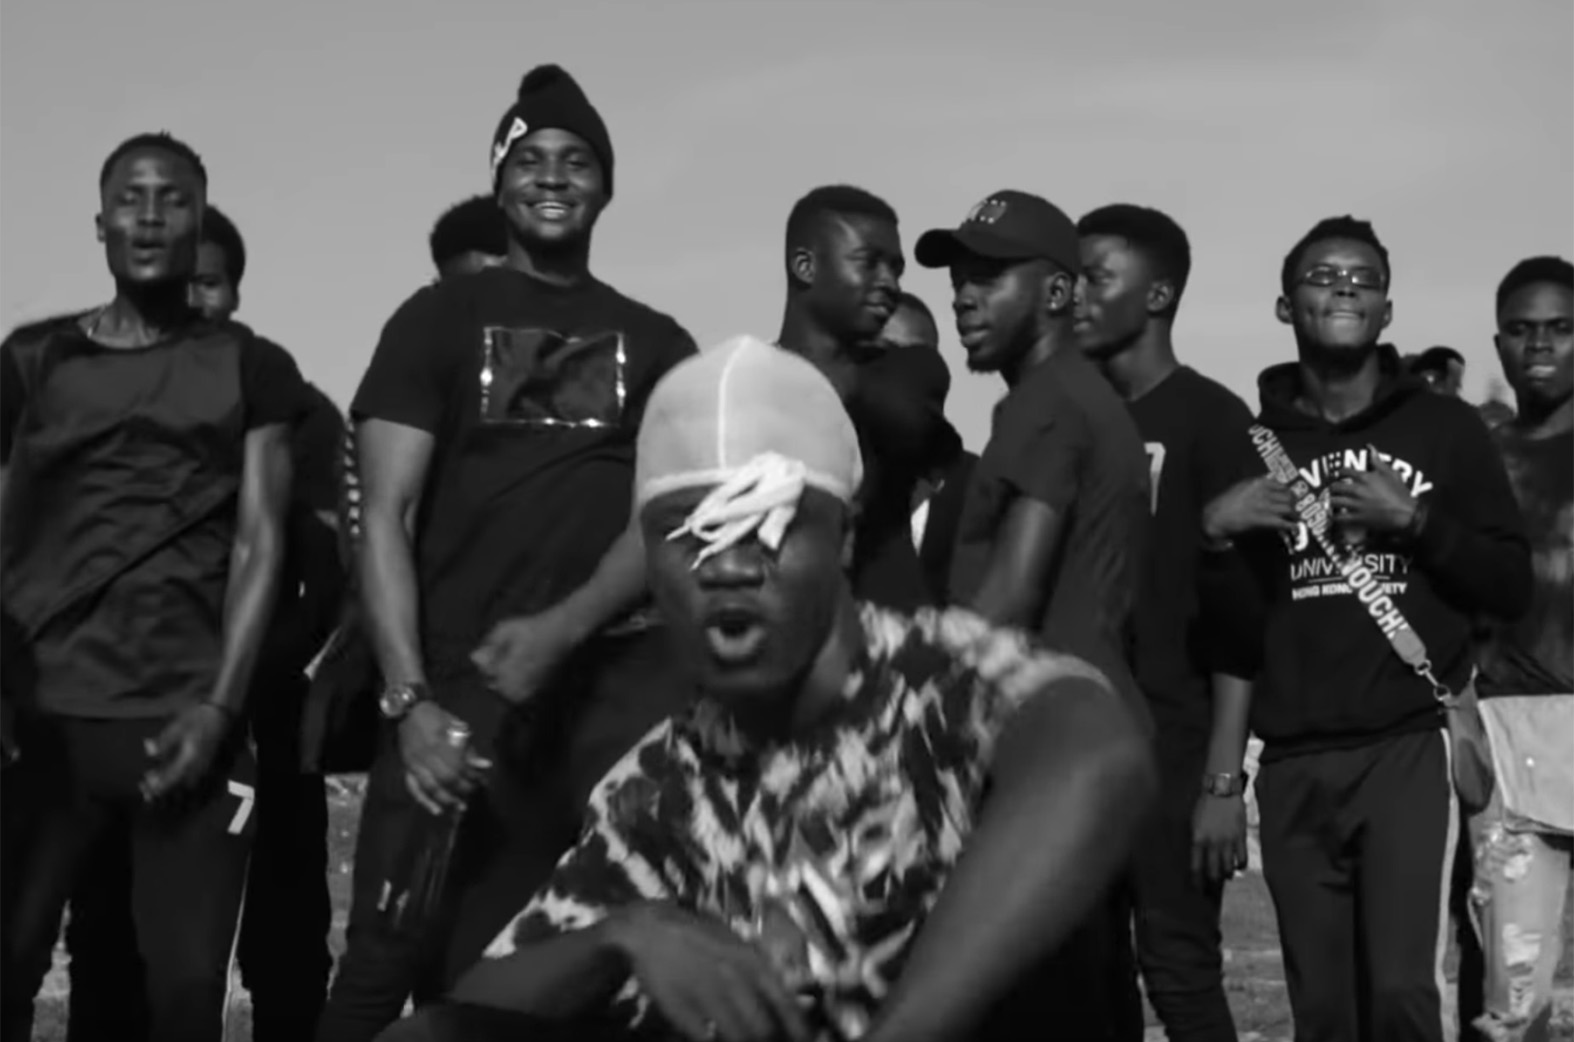 Video: Squaaad (Youth Empowerment Video) by Pambour feat. JayFyn